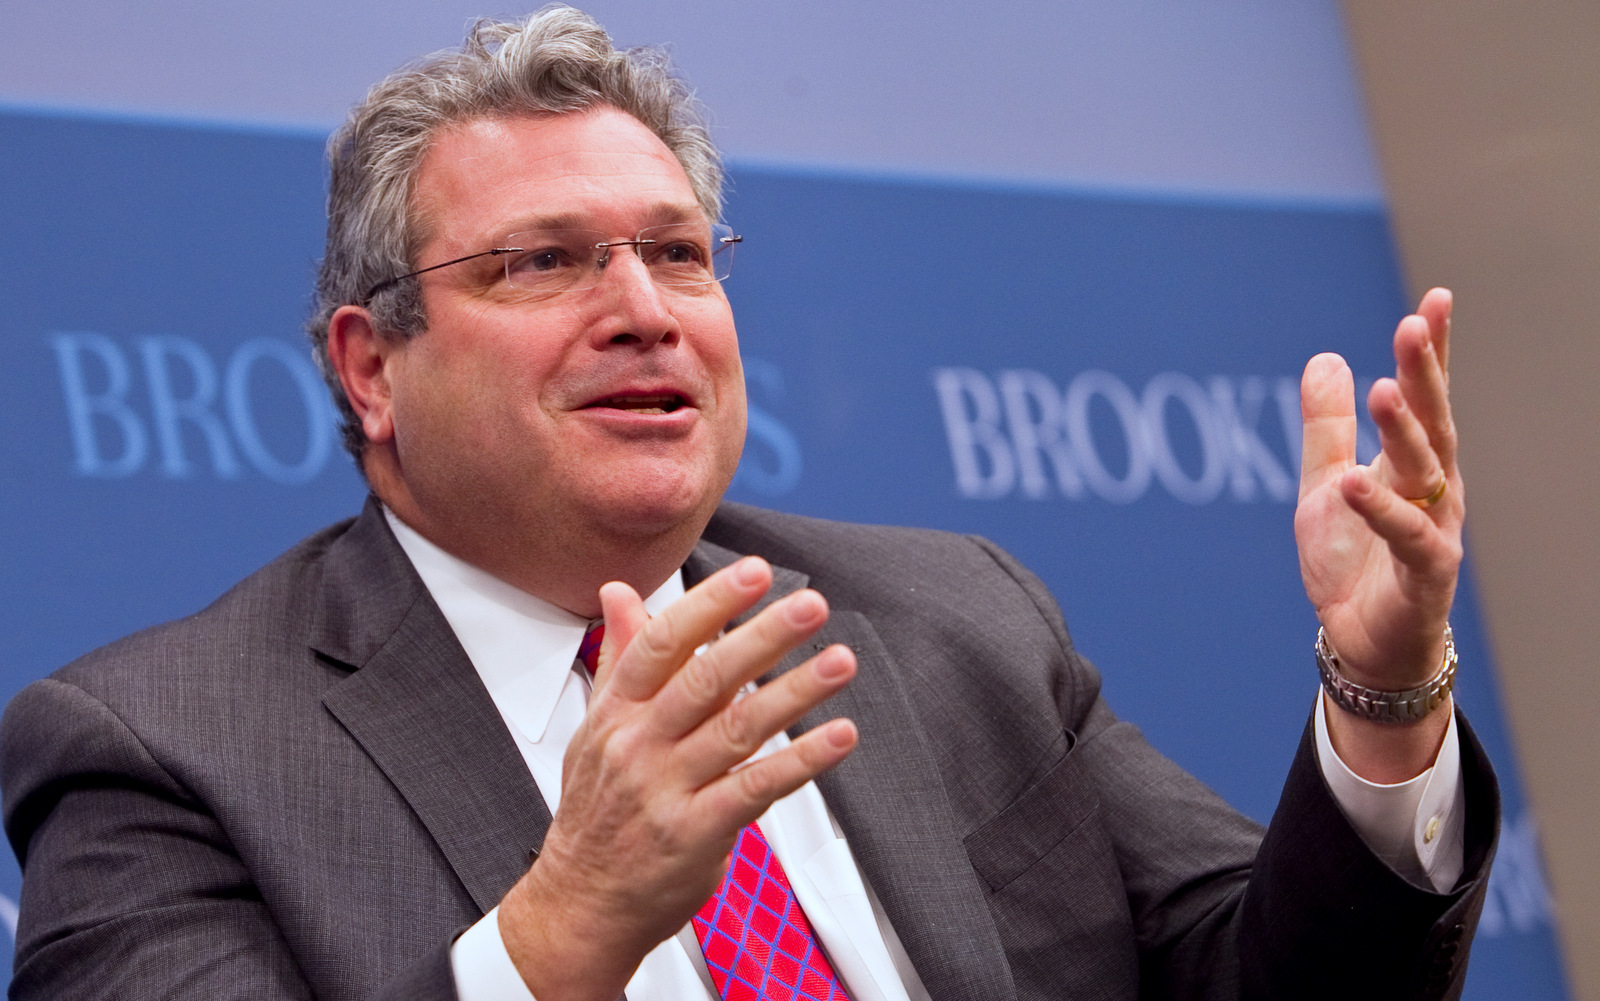 Neo-conservative stategist Robert Kagan speaks at a Brookings Institute event.